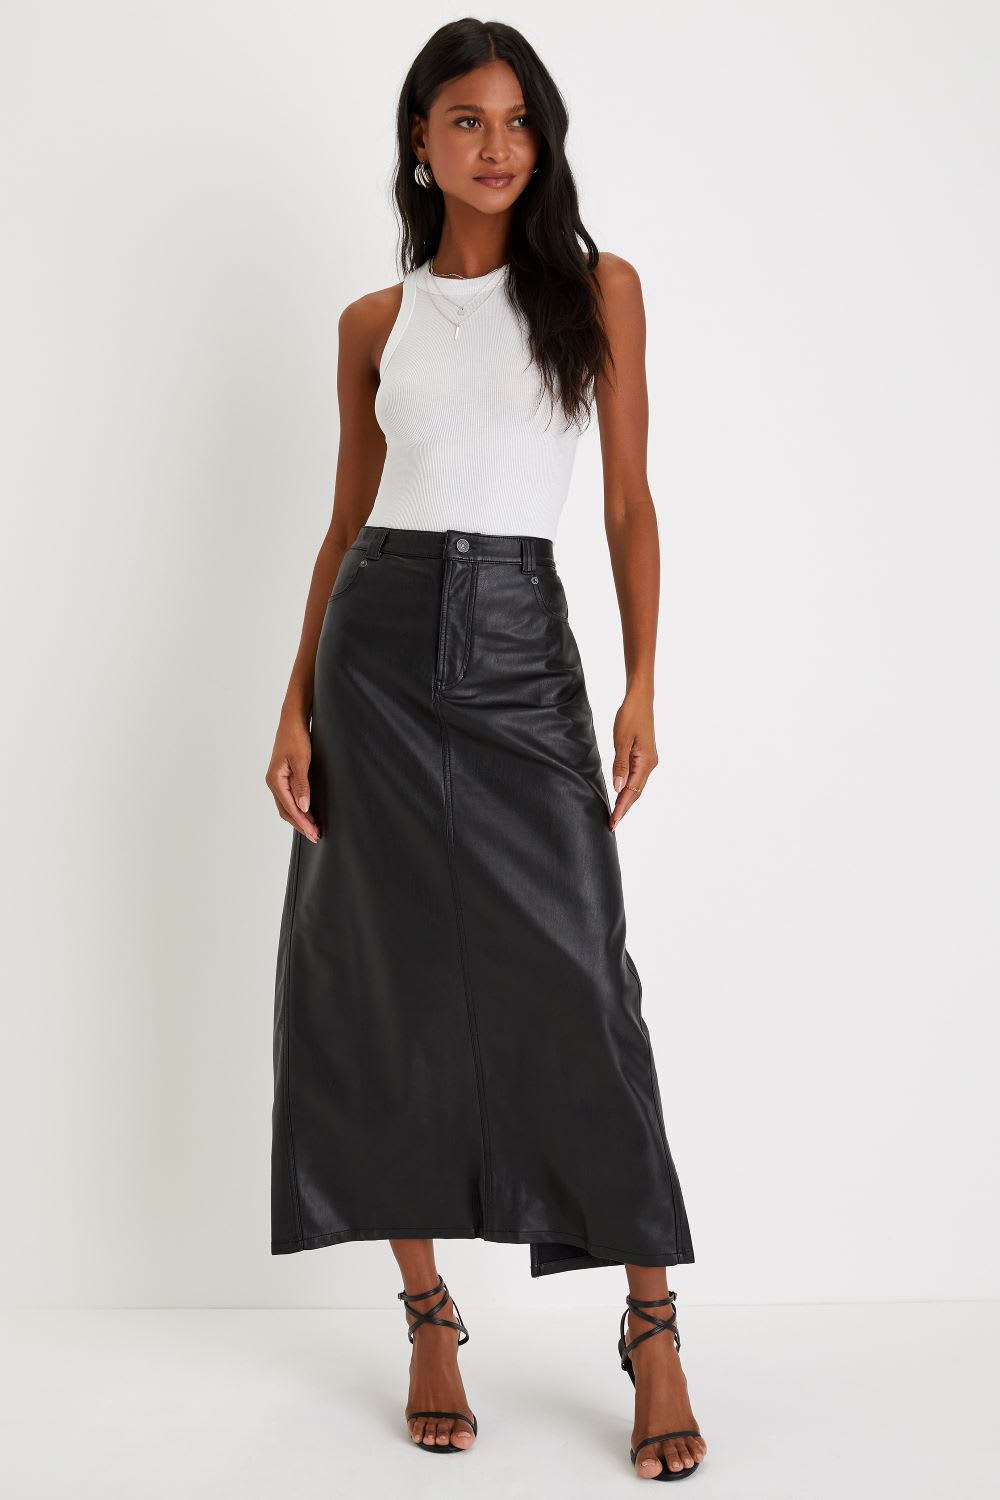 Long Skirt Outfits: How To Style Maxis & Midis This Season - Lulus.com ...